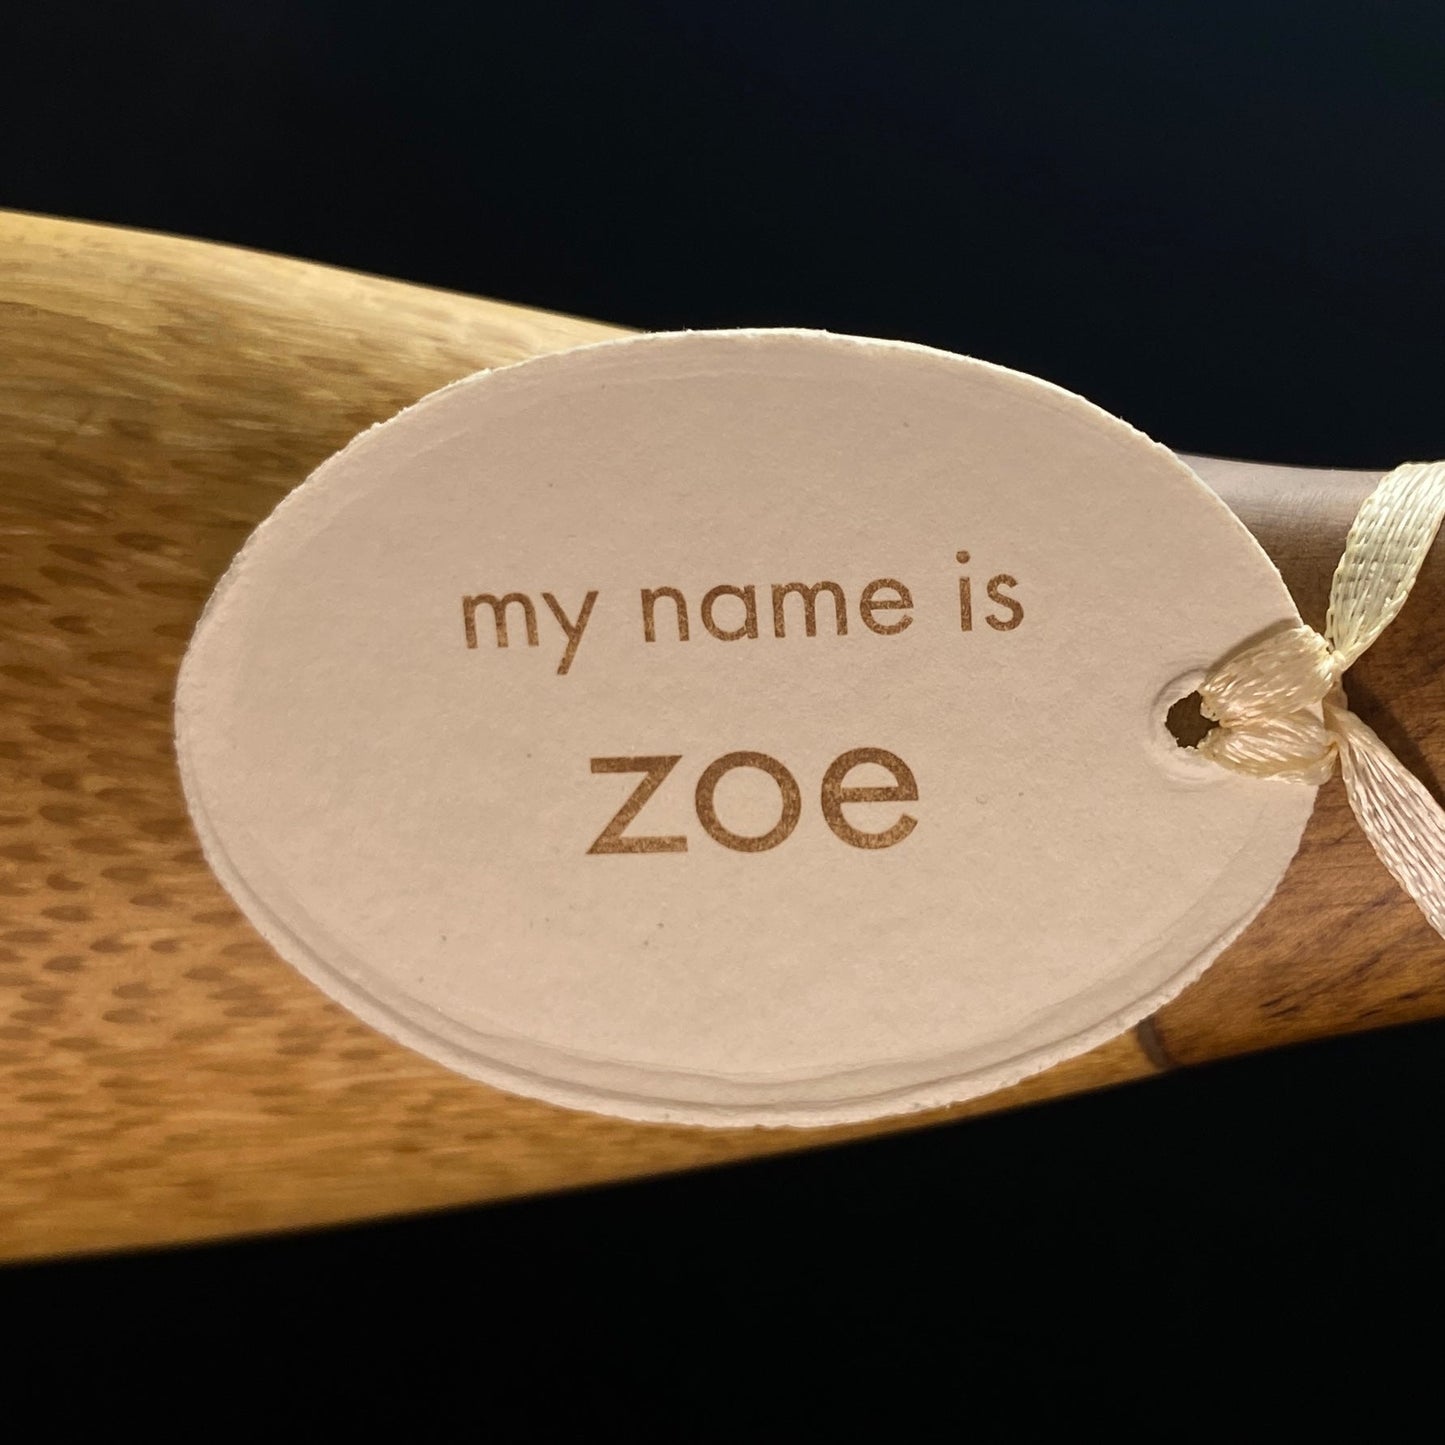 Zoe - Hand-carved and Hand-painted Bamboo Duck with Polka